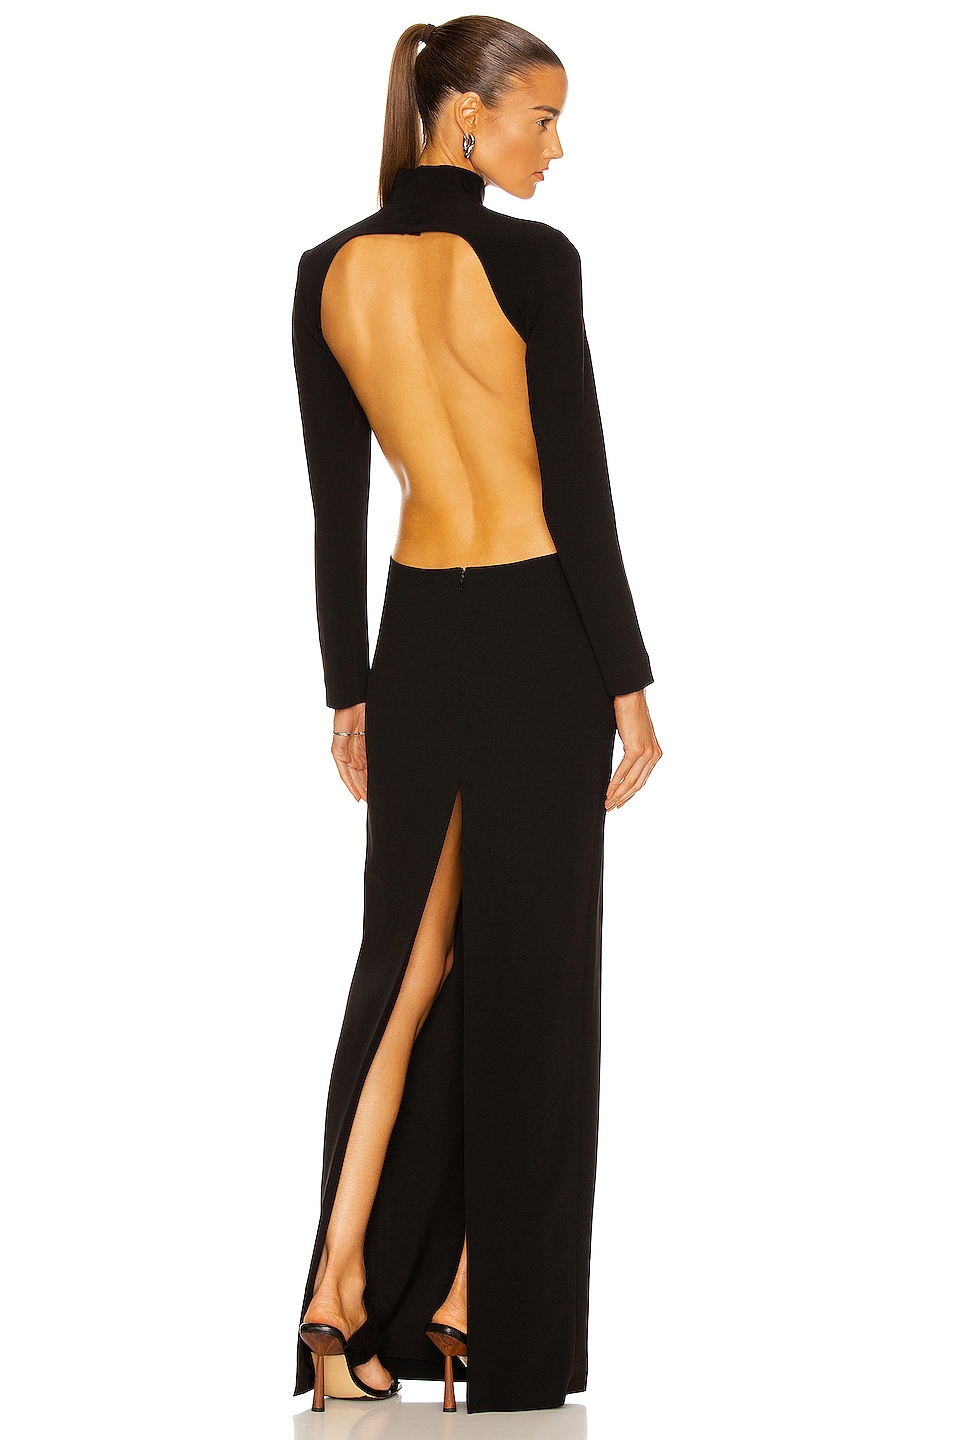 MONOT Backless Maxi Dress in Black | FWRD